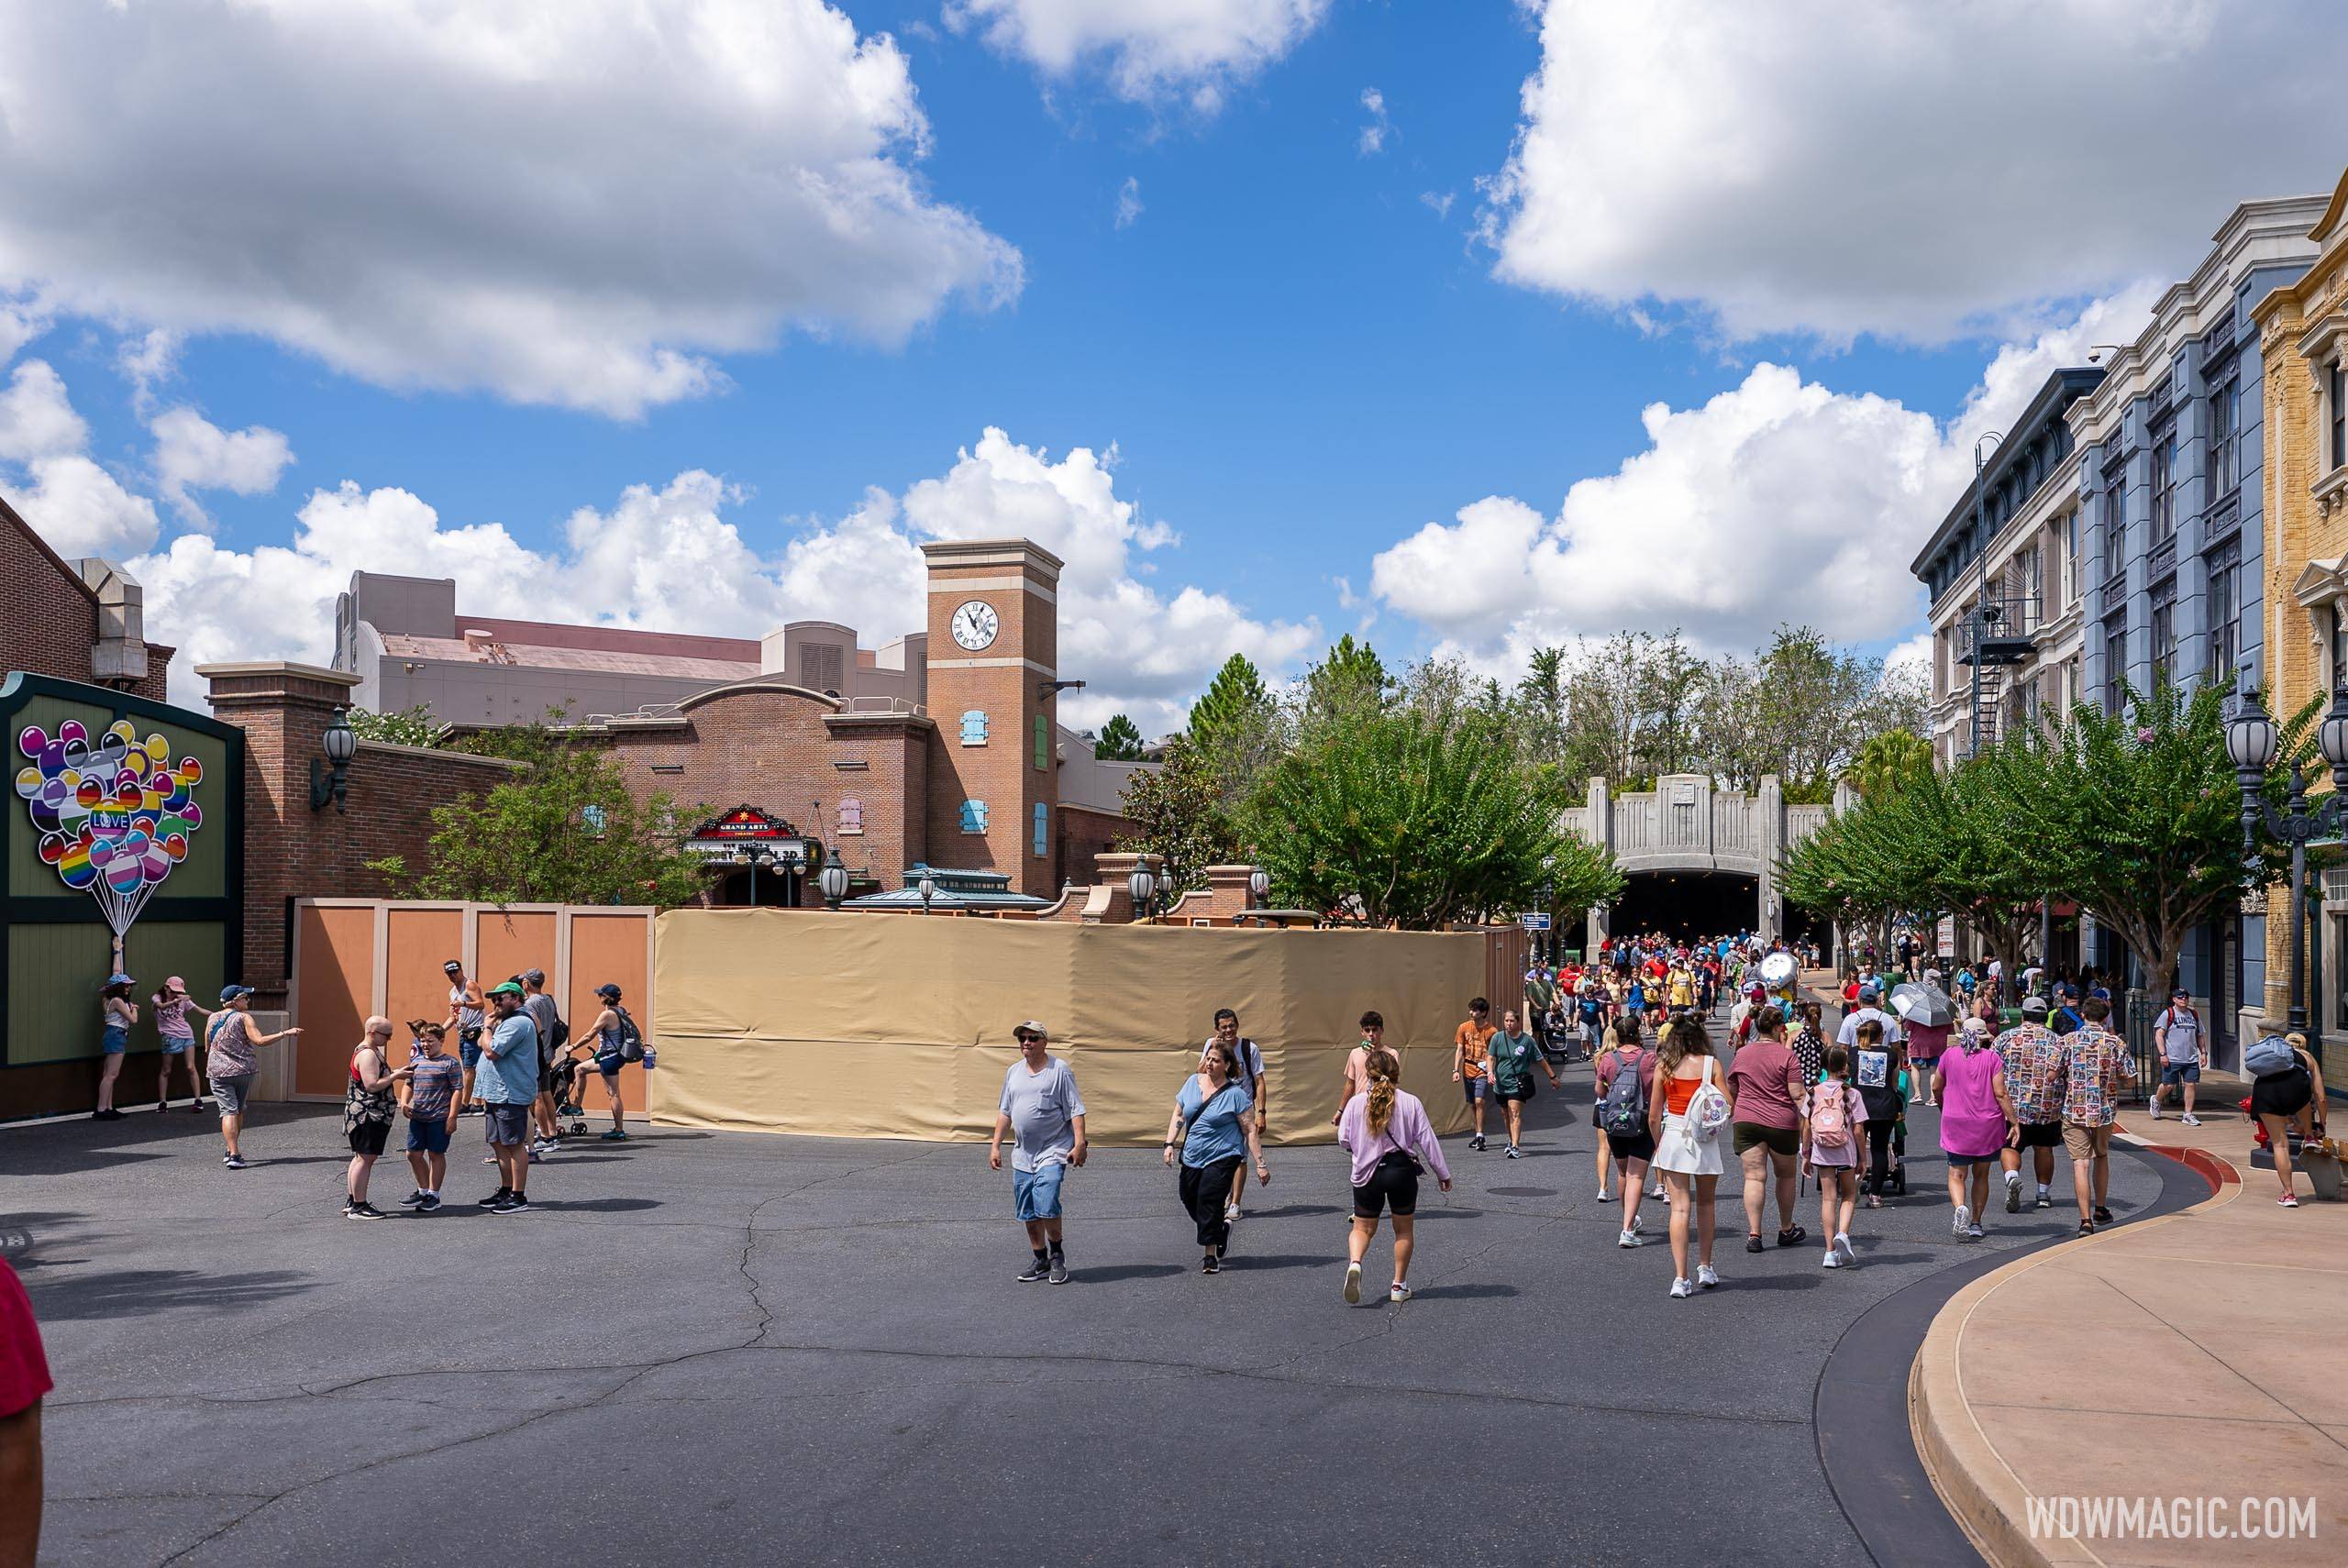 Construction walls up at Grand Avenue in Disney's Hollywood Studios